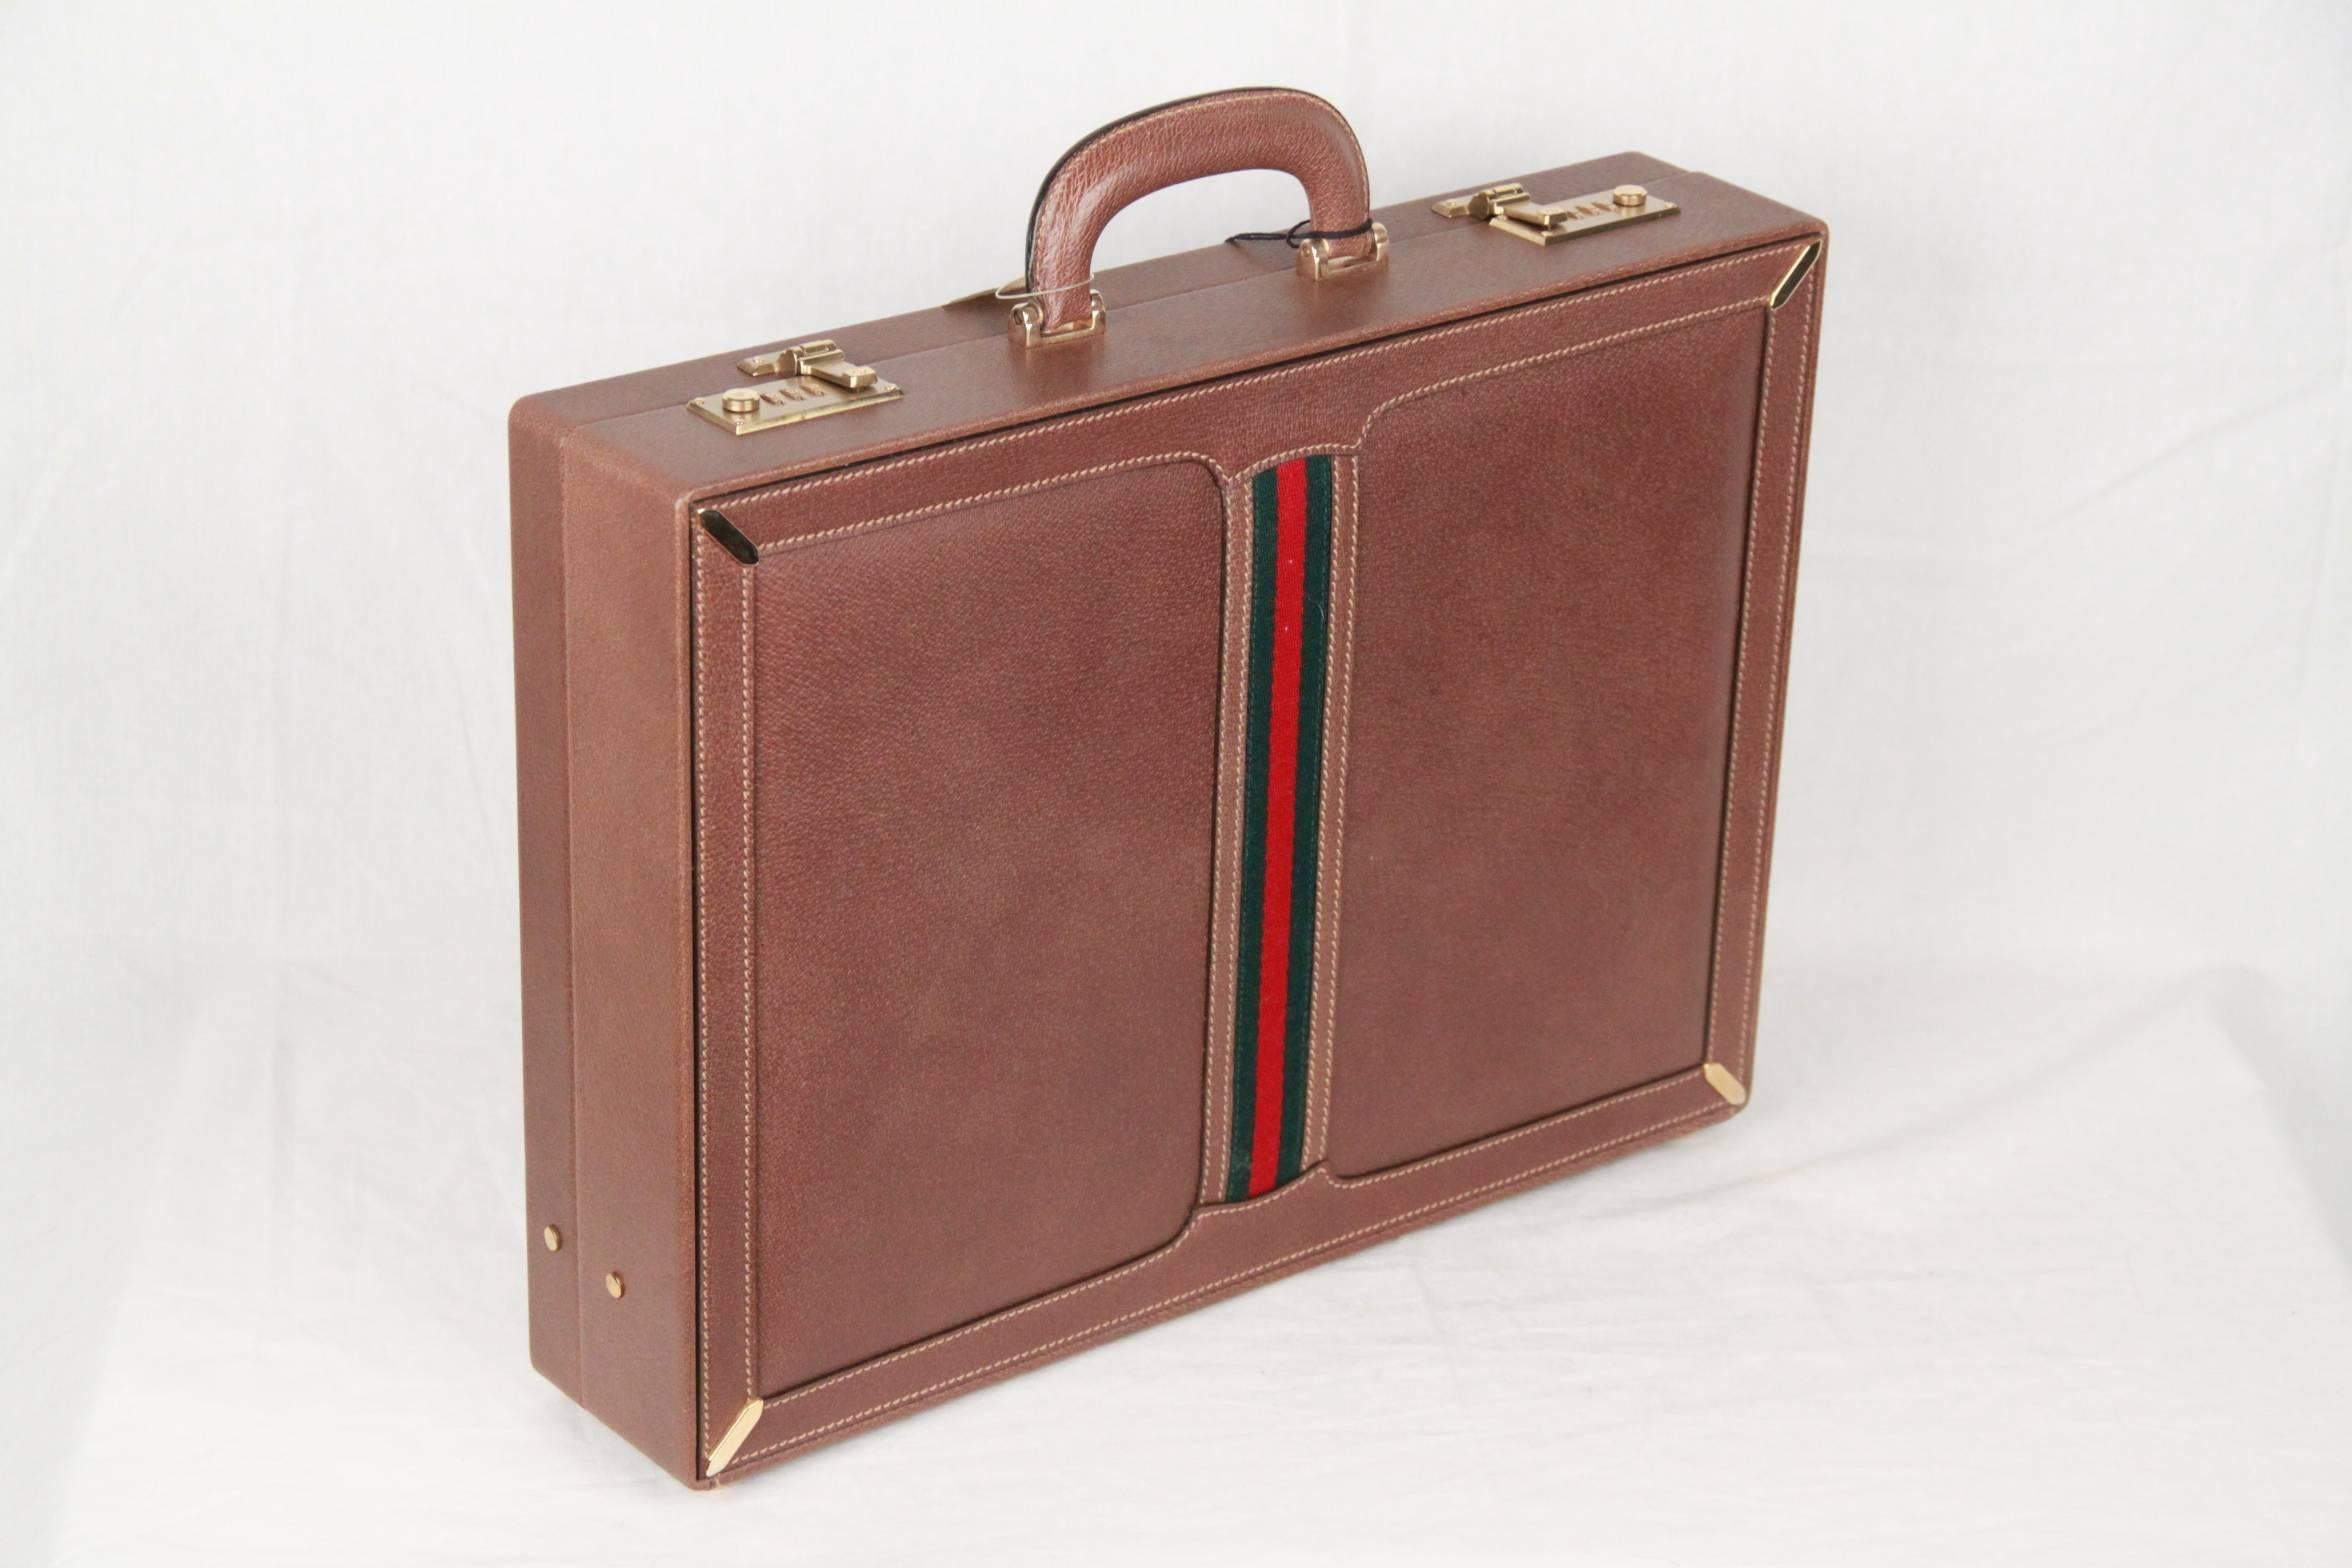 Gorgeous Gucci hard-side briefcase in tan leather, with green/red/green stripes detailing. It is big and strong enough to carry your laptop and also provides plenty of space to organize and dived paper work, pens, phone, buisness cards, and more.